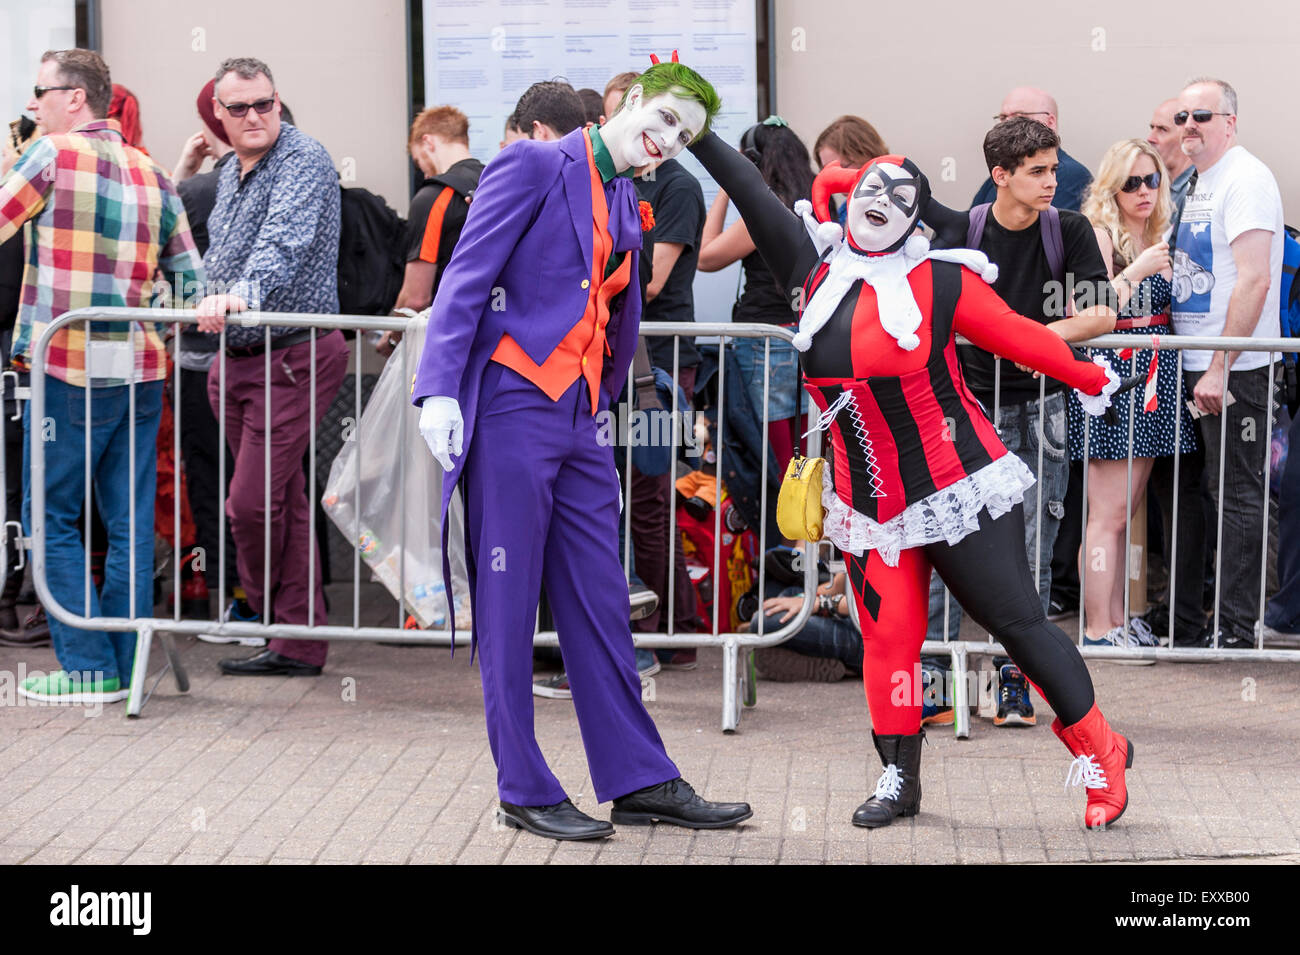 London, UK. 17 July 2015. Fans, including these two people dressed The Joker and Harley Quin from Batman, gather outside Olympia in Kensington for the opening day of London Film & Comic Con, a convention for lovers of film, television and comics. Many attendees will have the chance to meet their on screen heroes during the three day event through live appearances from Hollywood movie stars. Credit:  Stephen Chung/Alamy Live News Stock Photo